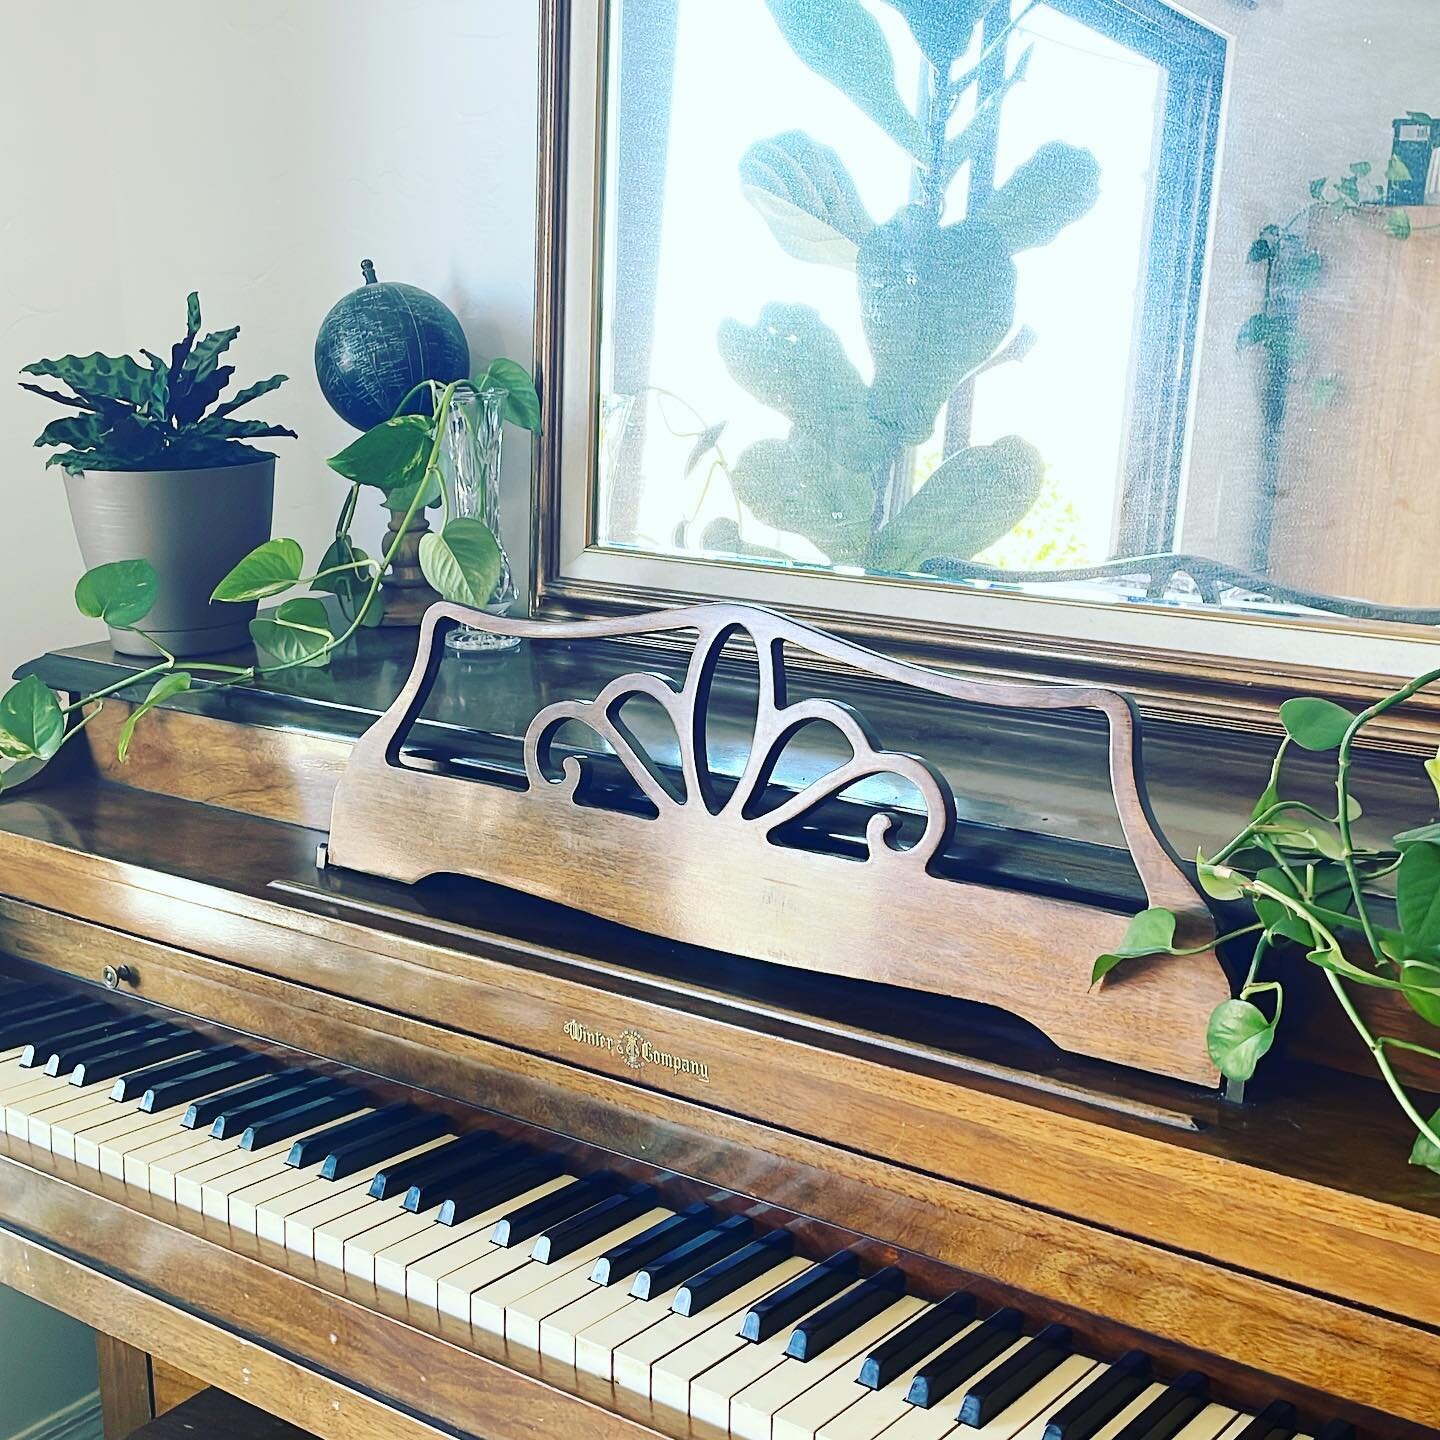 Over the weekend a neighbor commented they hadn&rsquo;t heard the piano recently. They shared how much they love sitting in their backyard and hearing the beautiful music. So yesterday, I opened the windows and sat here and played.

What my neighbor 